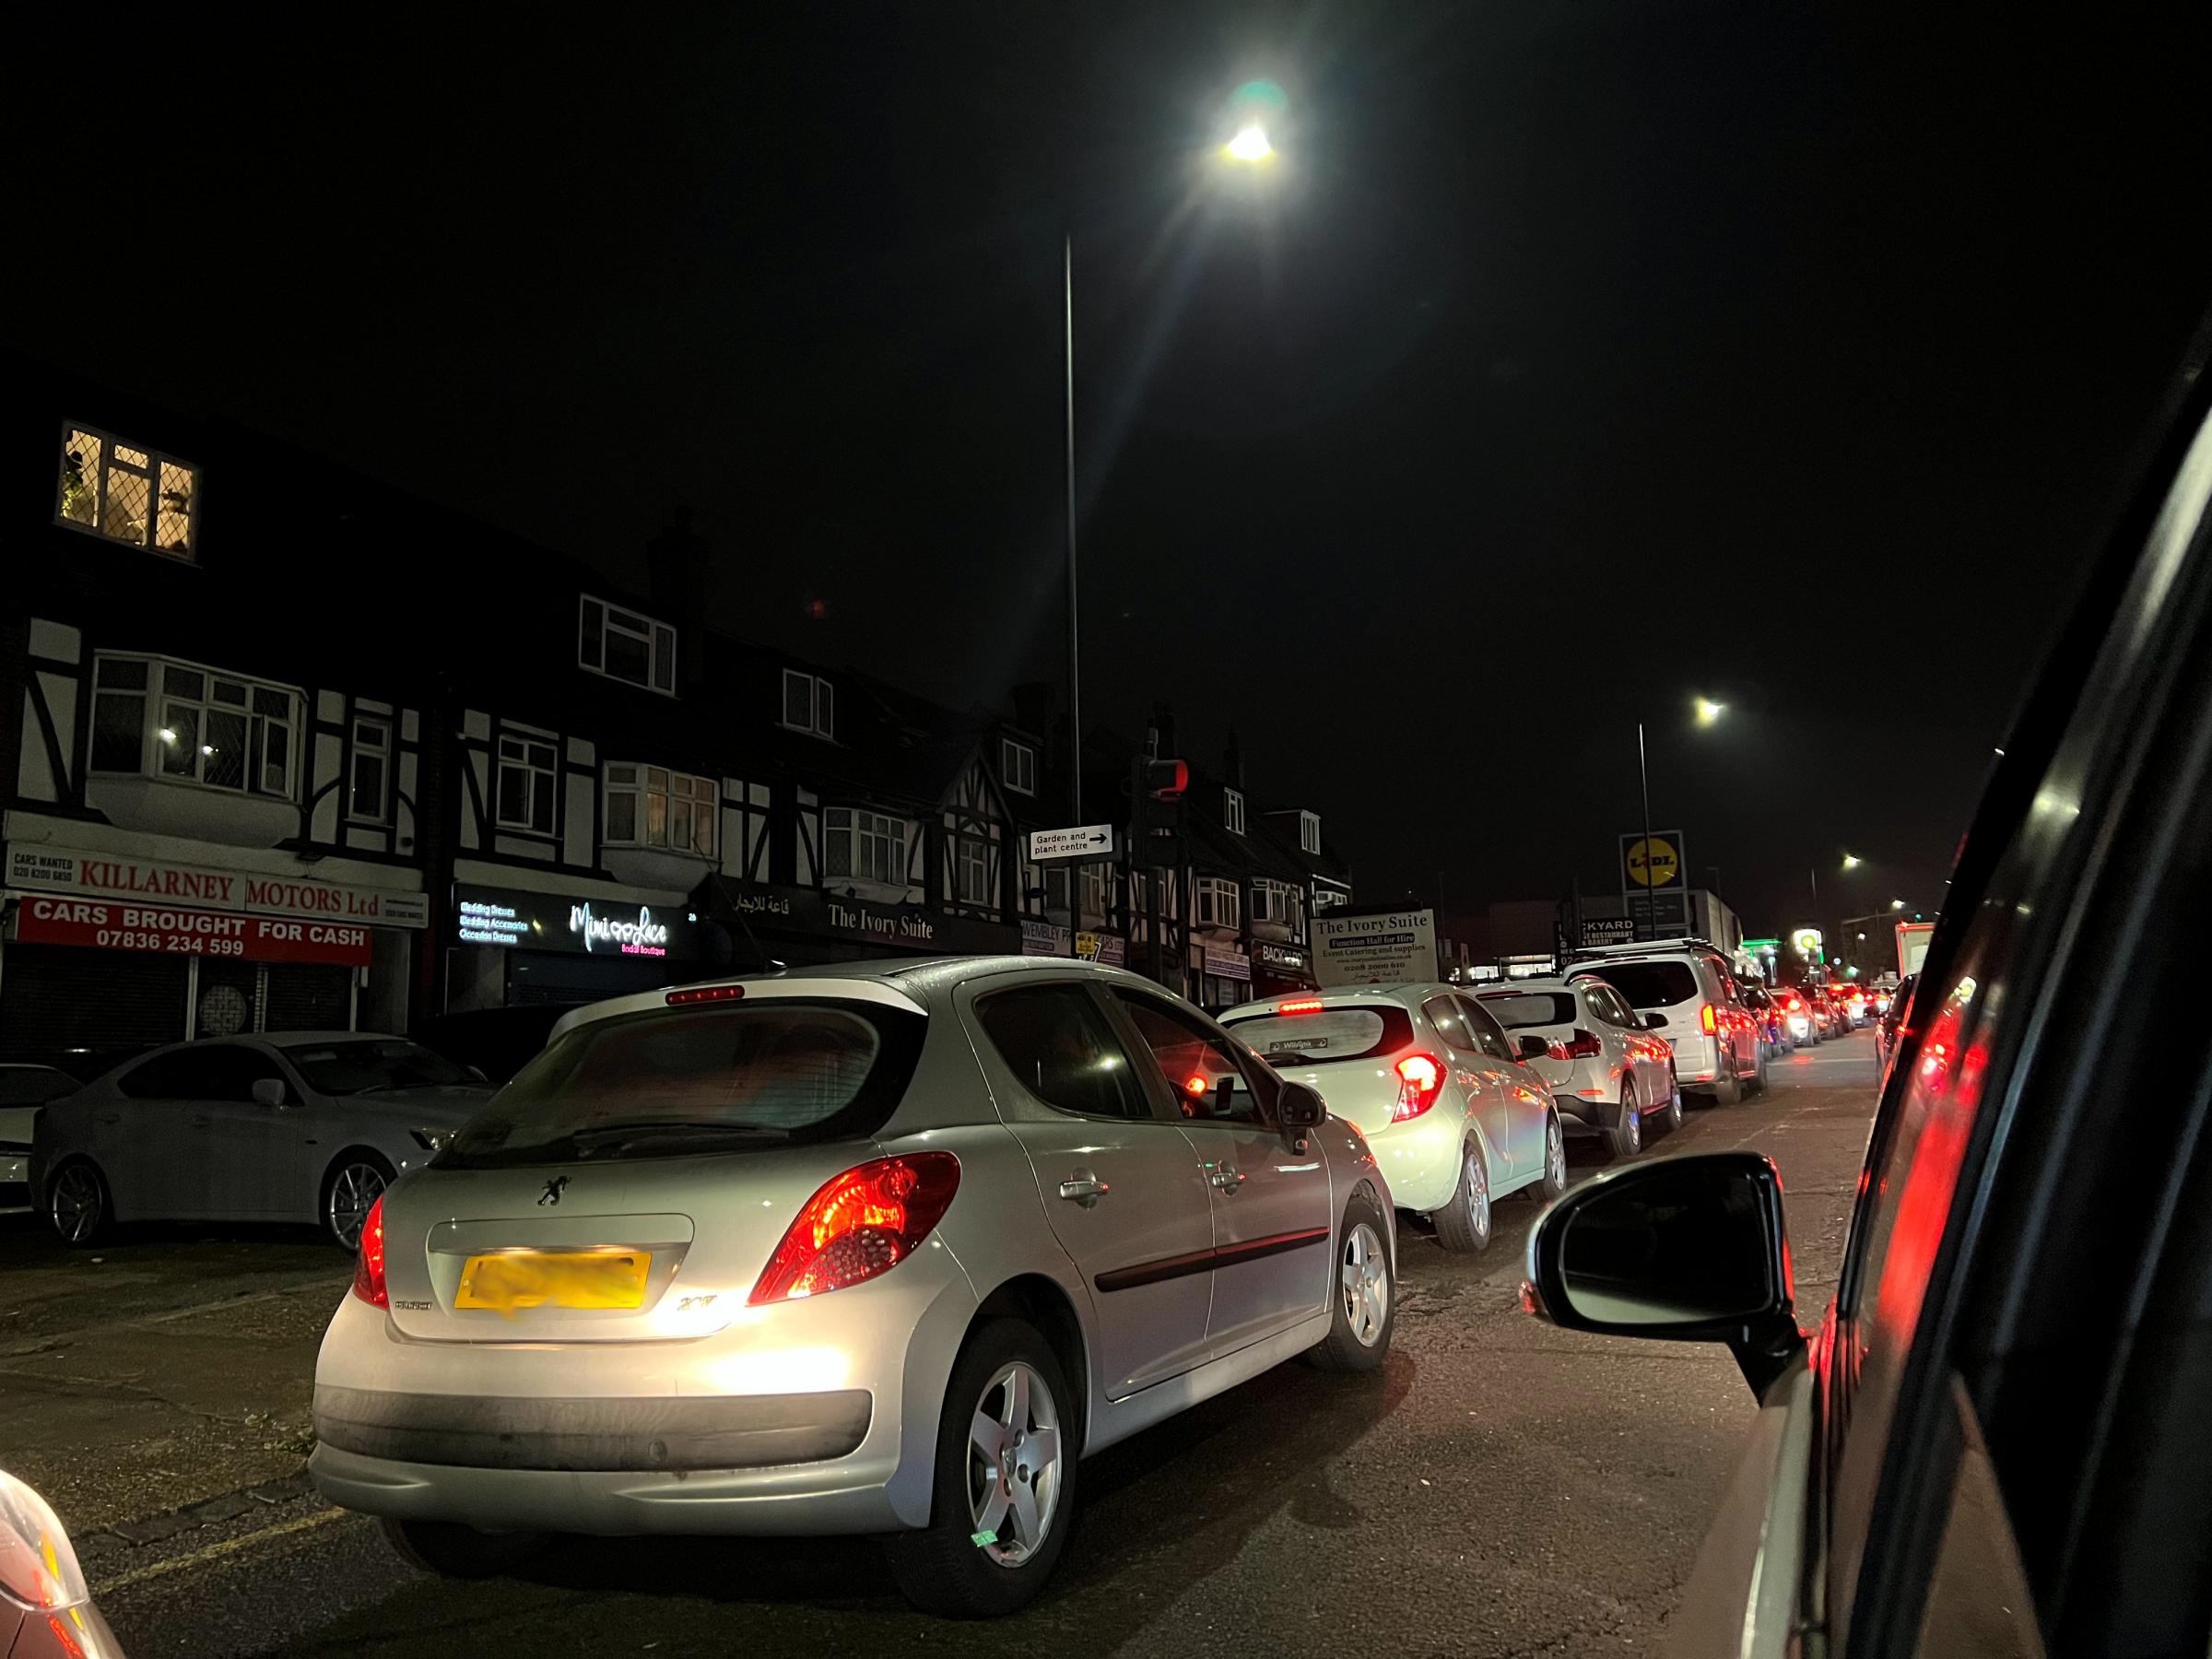 Some cars queued for at least 30 minutes in a wait for petrol (Photo: Joseph Reaidi)